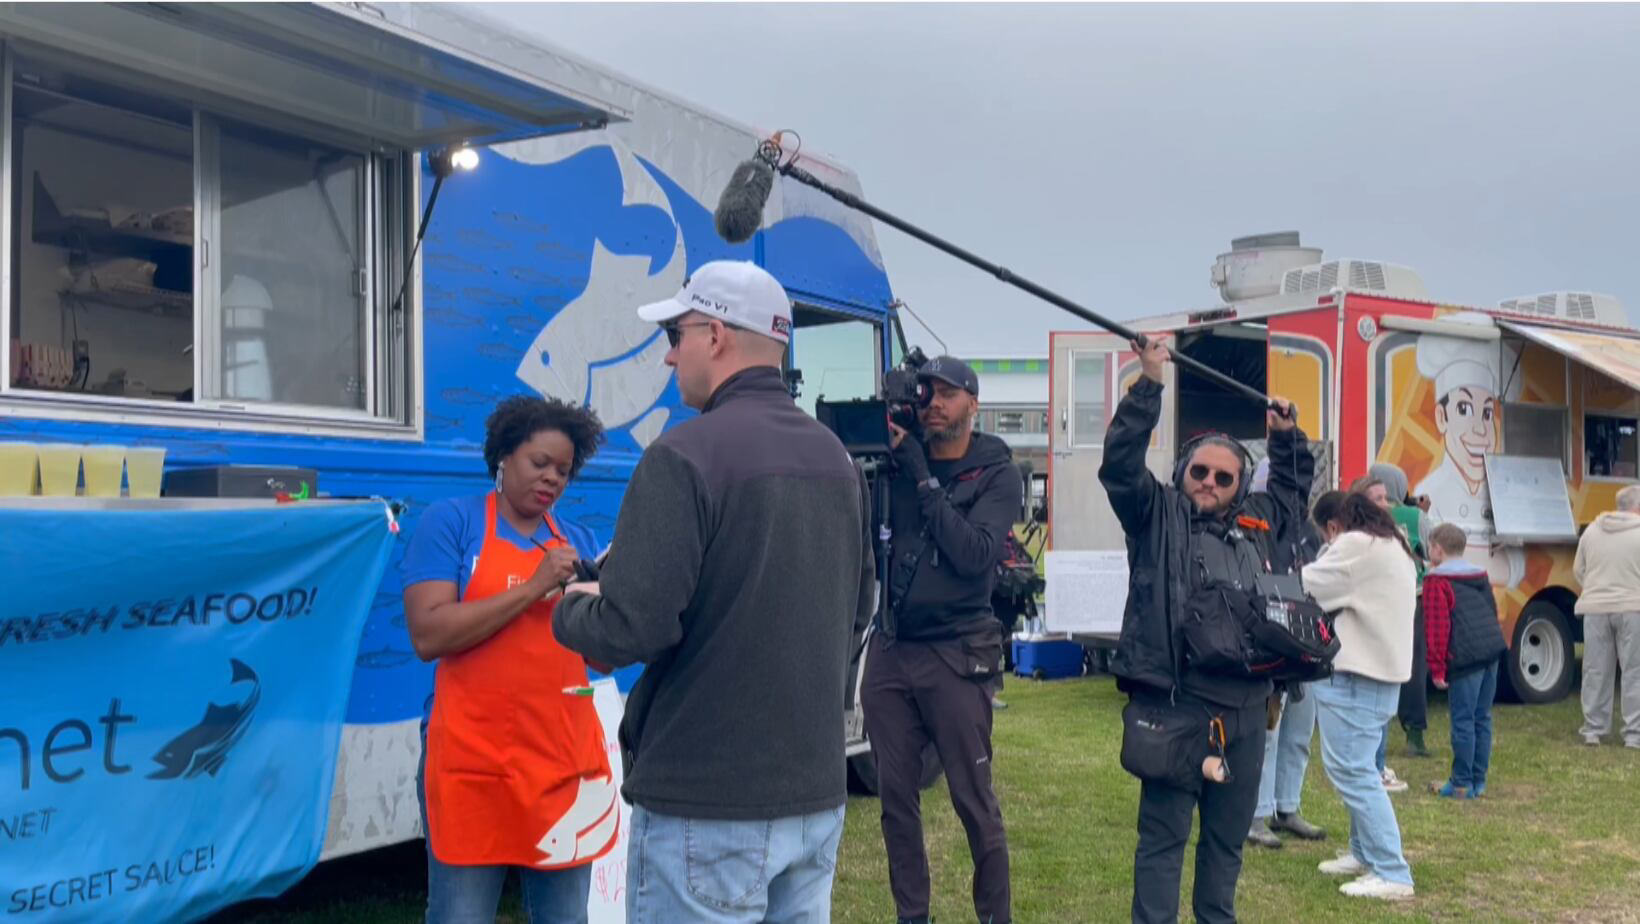 ‘The Great Food Truck Race’ now filming in Biloxi